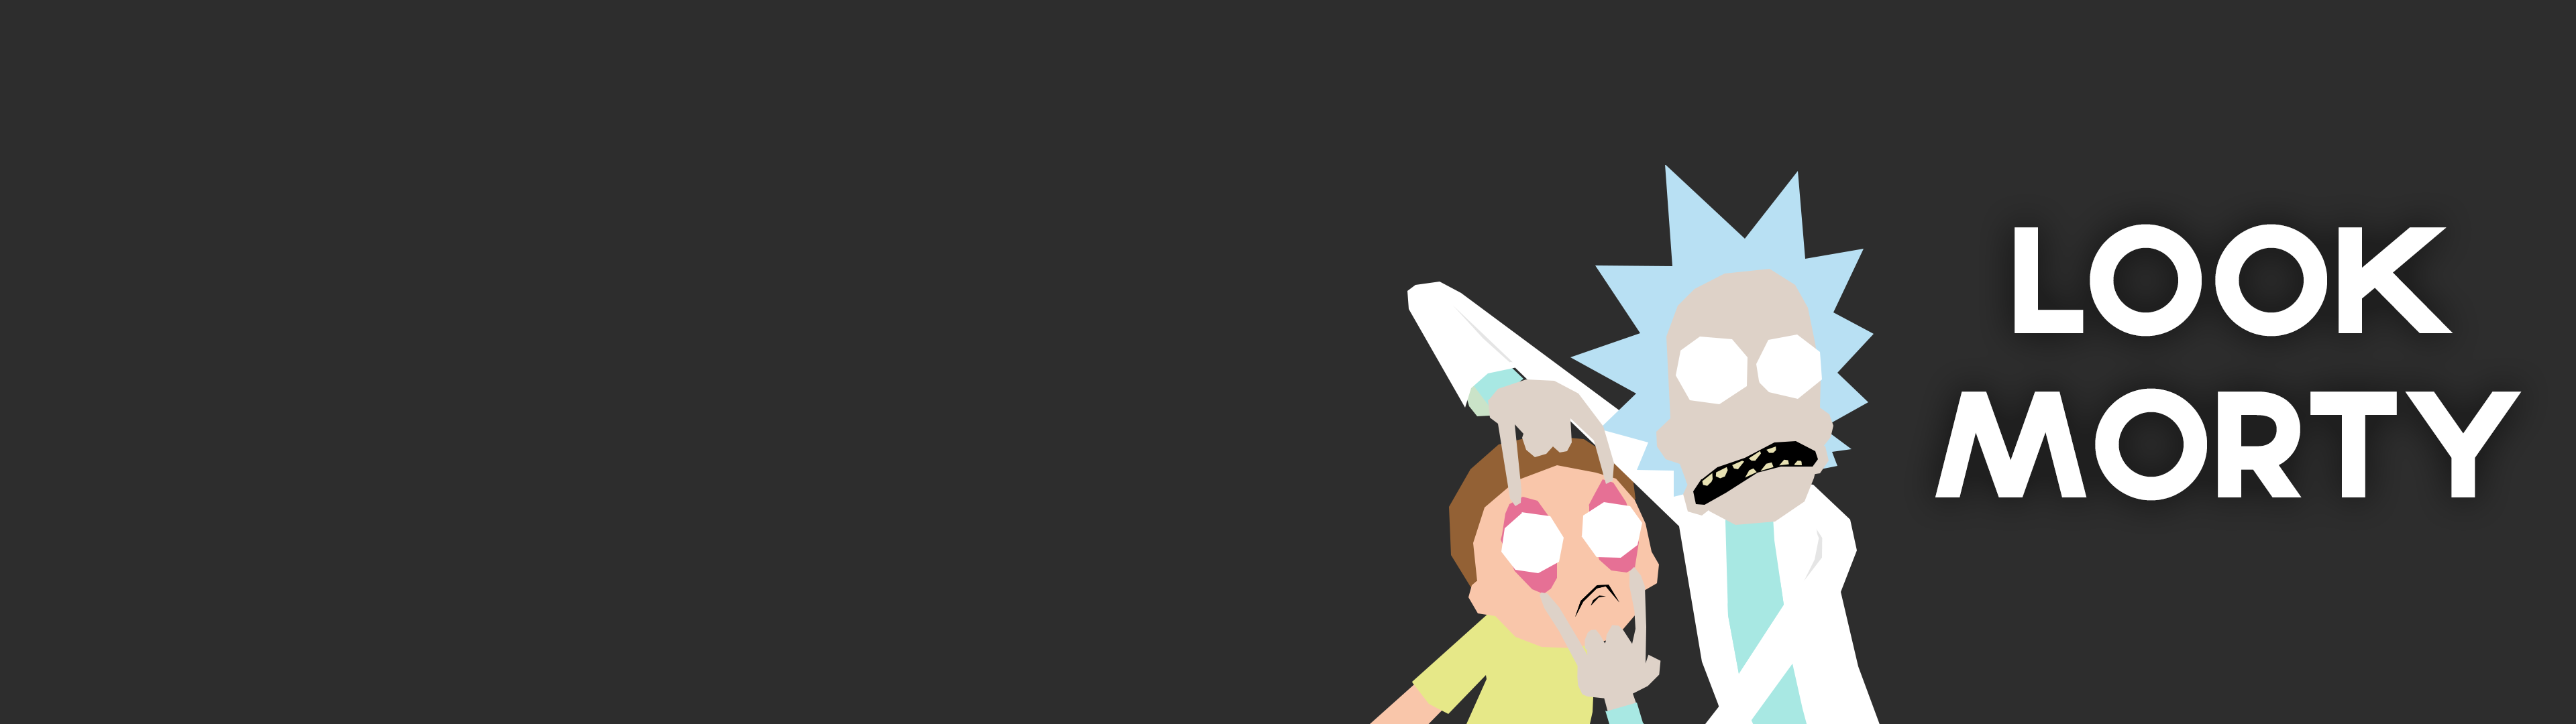 Rick And Morty Wallpapers   3840 X 1080 Rick And Morty 529492